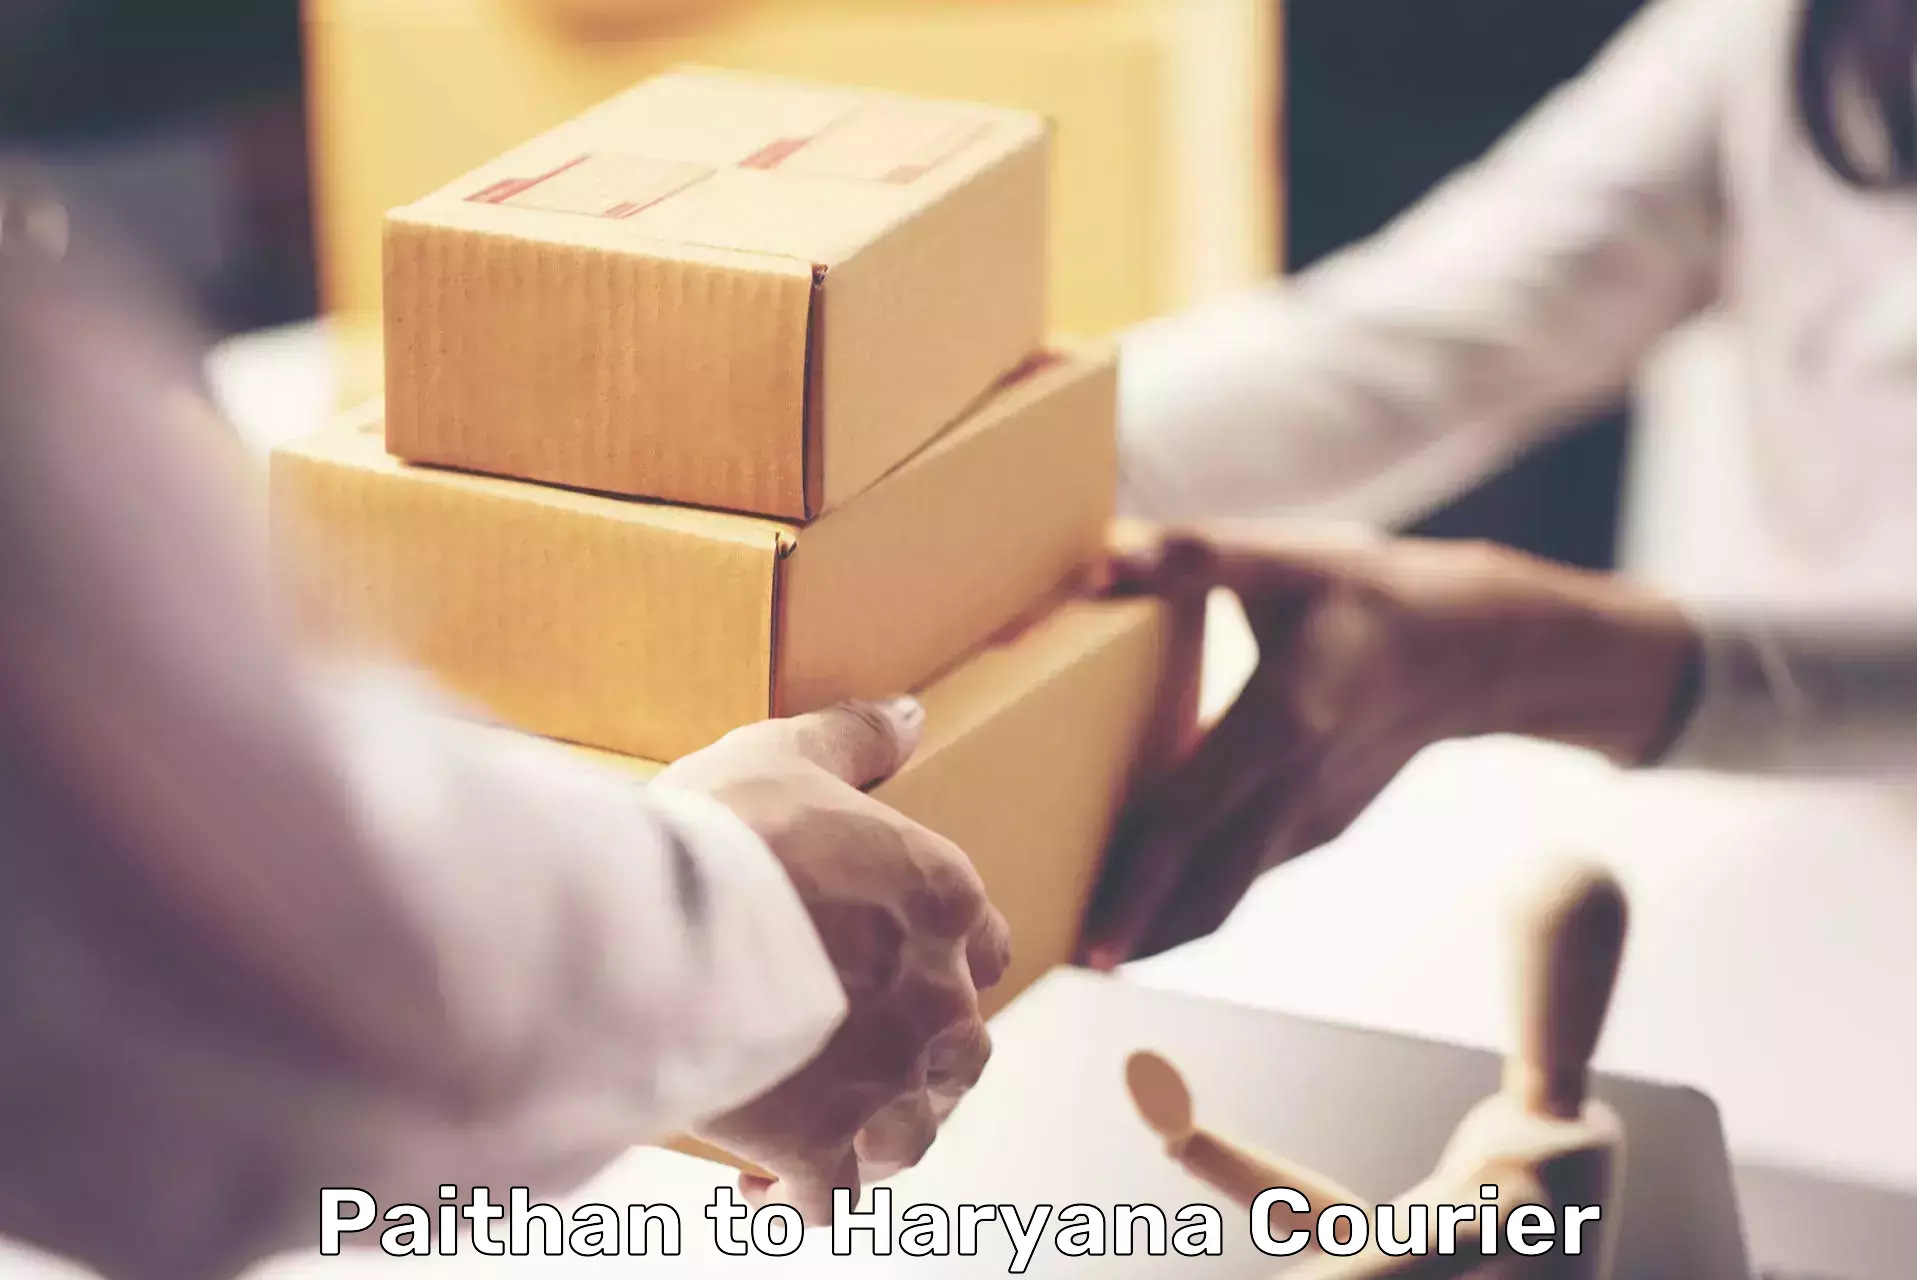 Multi-service courier options Paithan to Odhan